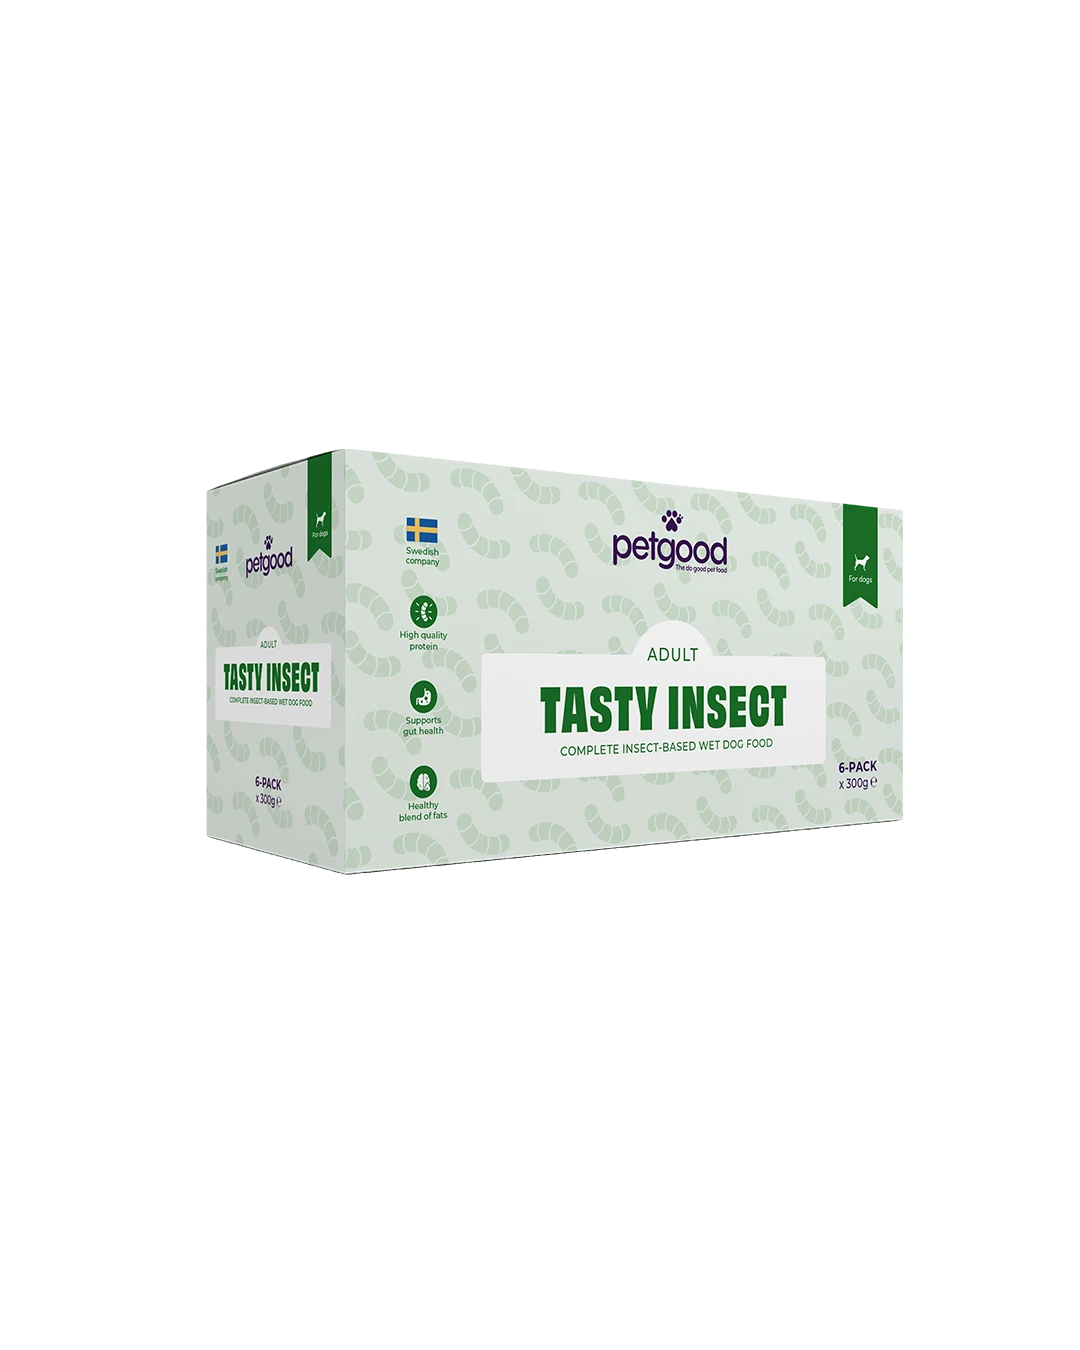 Insect-based wet dog food adult 6-pack